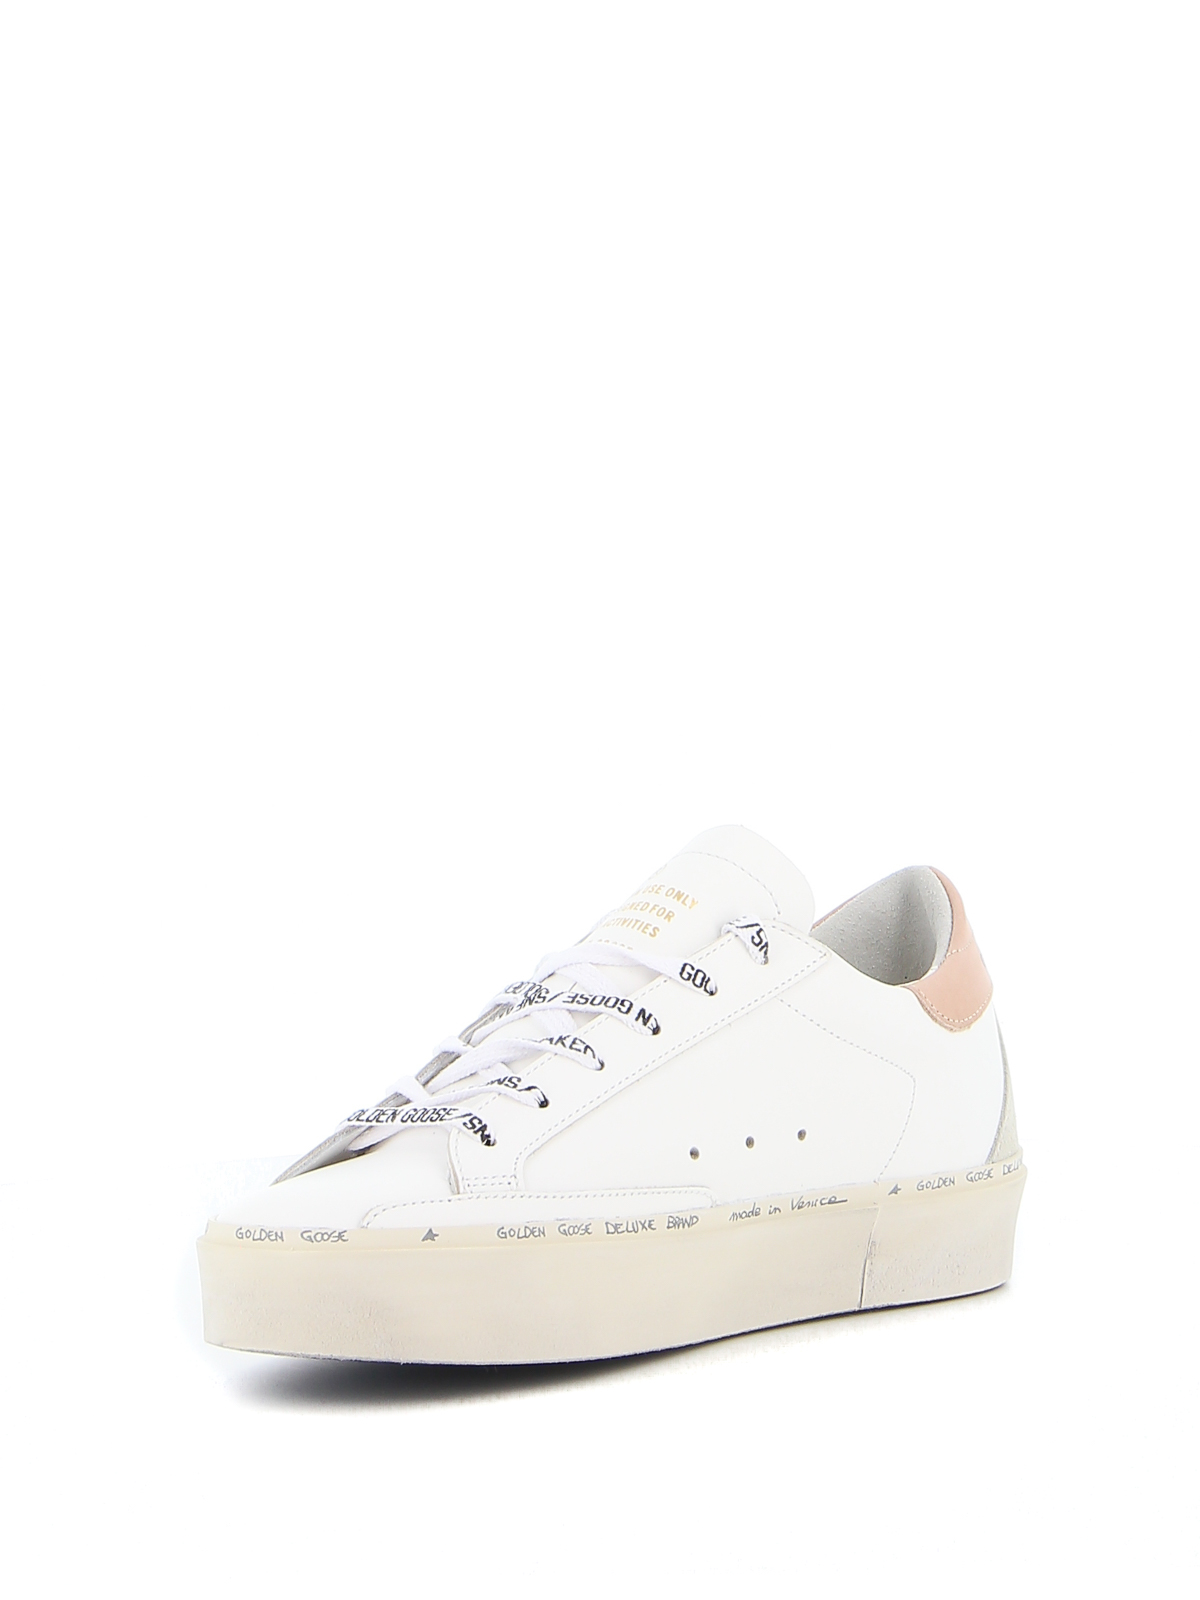 Trainers Golden Goose   Hi Star sneakers   GWFF